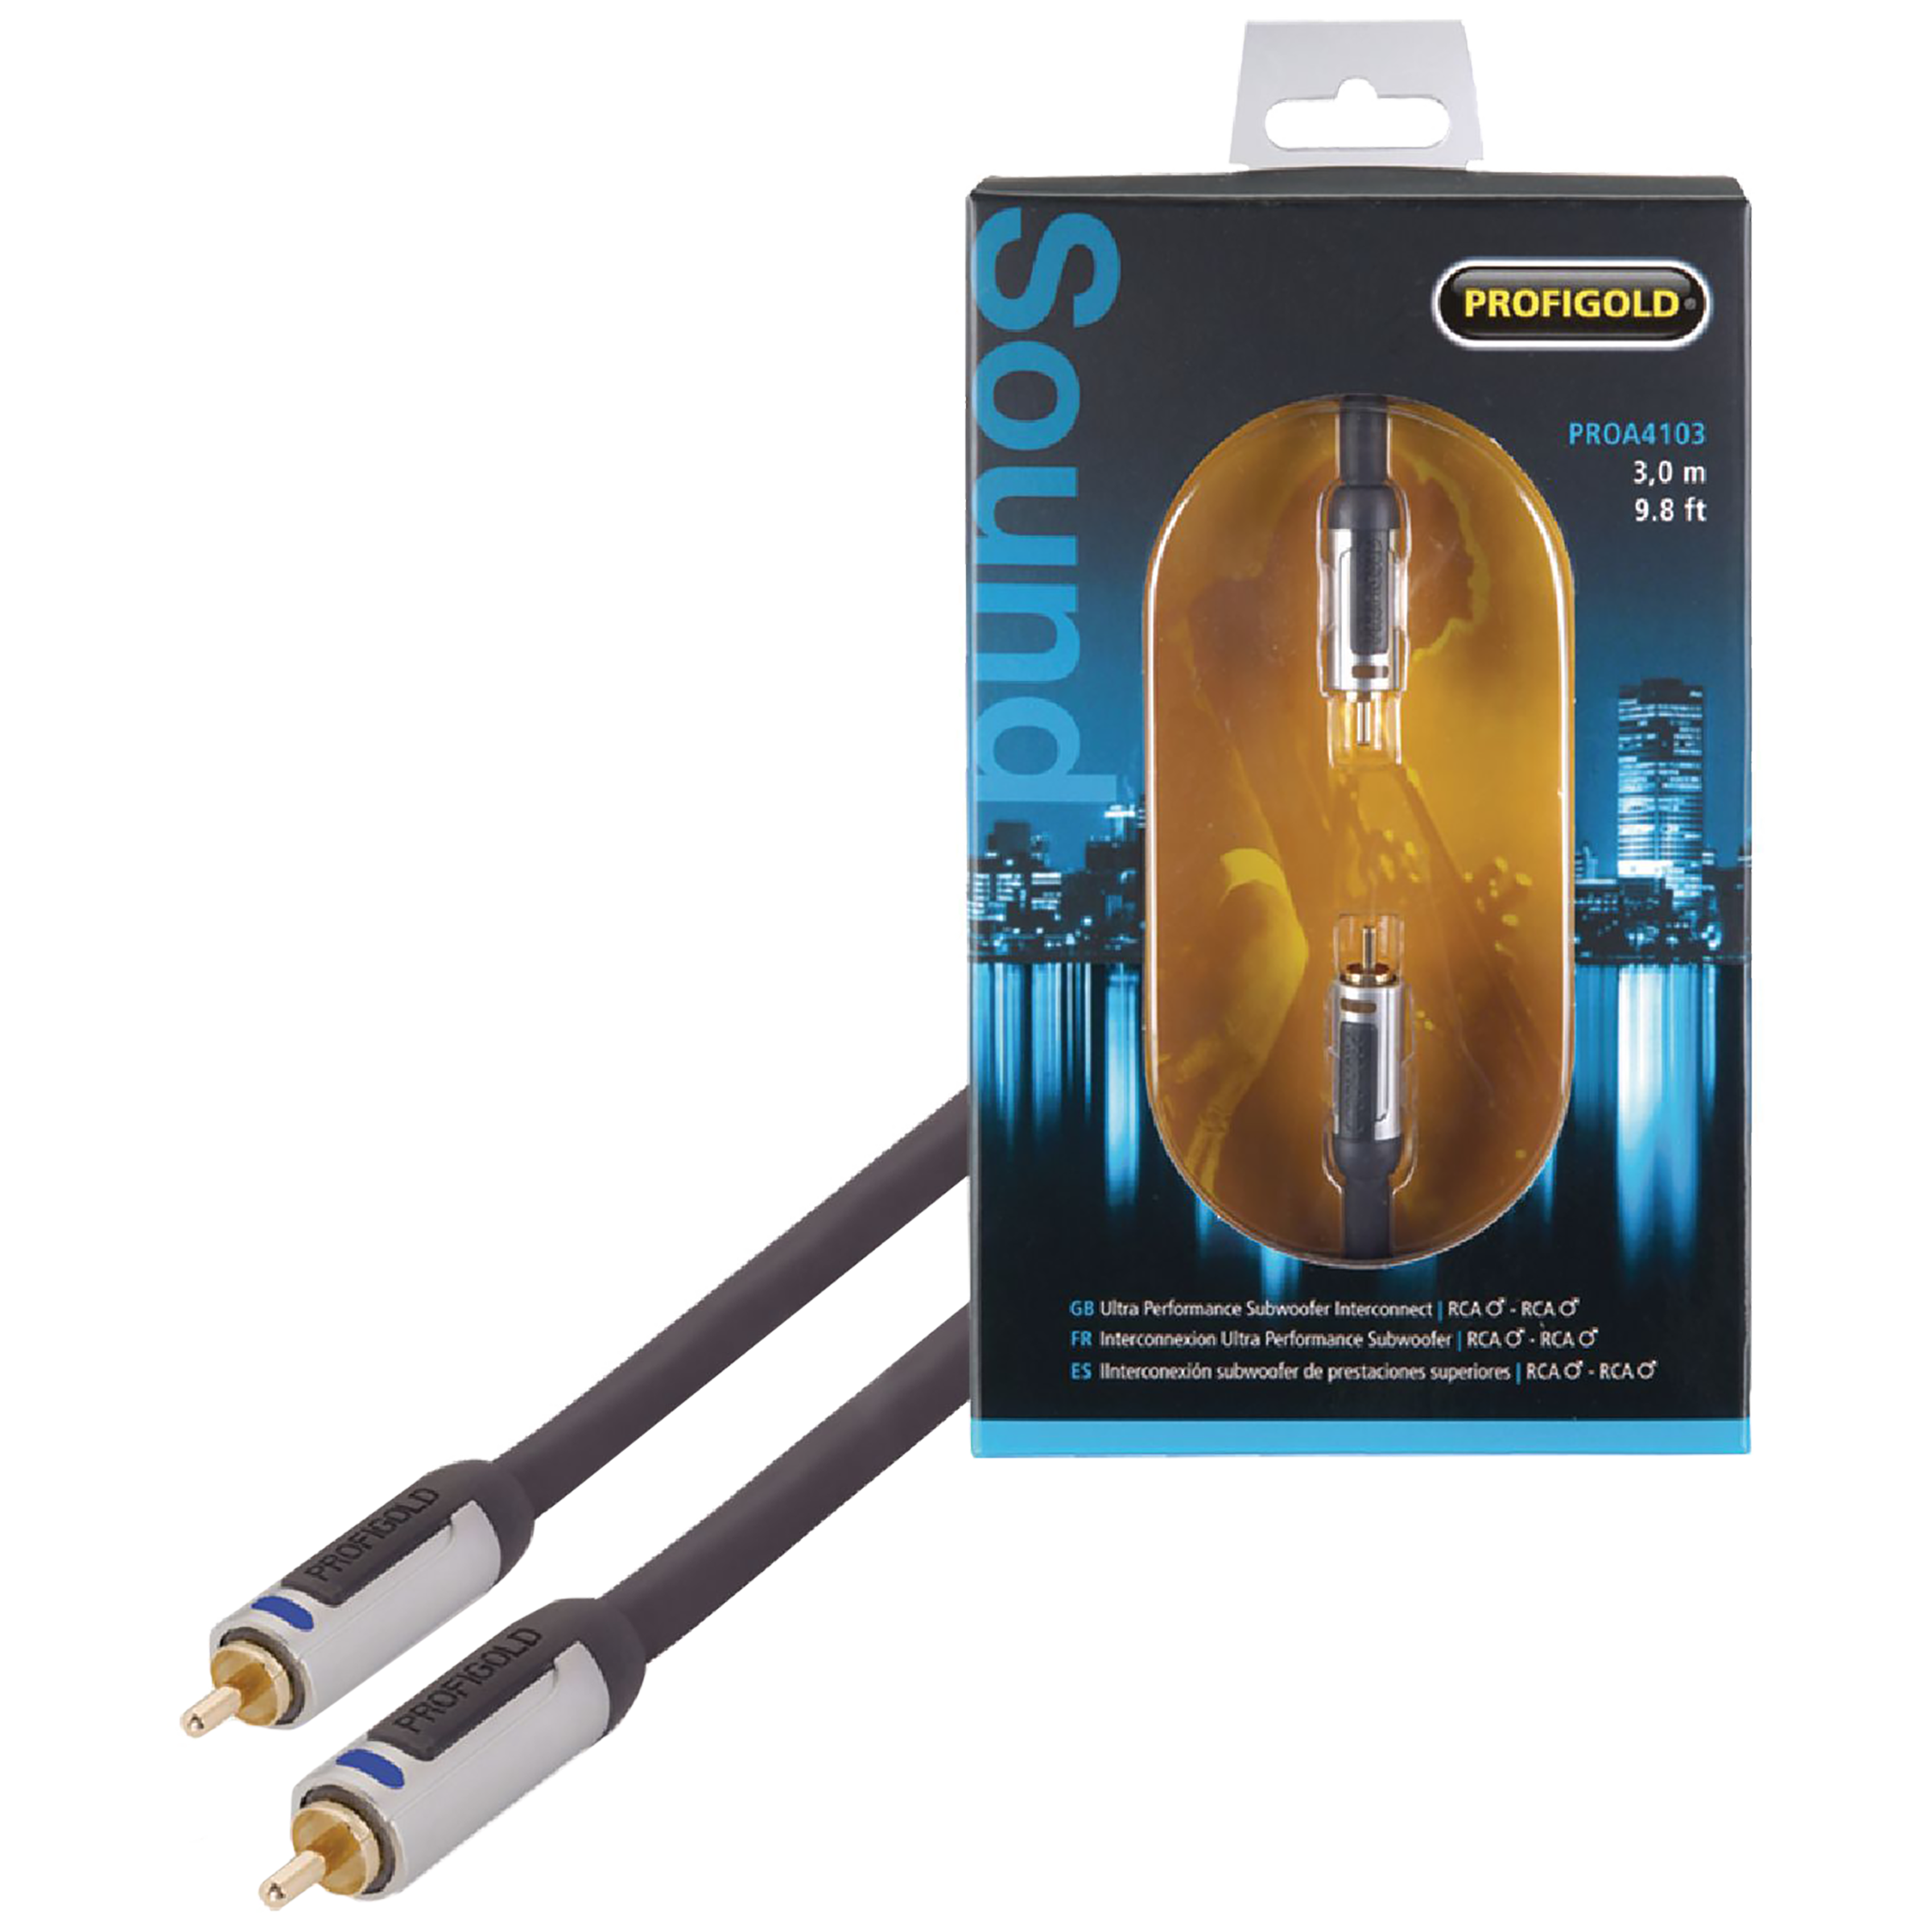 Profigold PROA4103 PVC 3 Meter RCA to RCA Audio Cable (Double Screening, Anthracite)